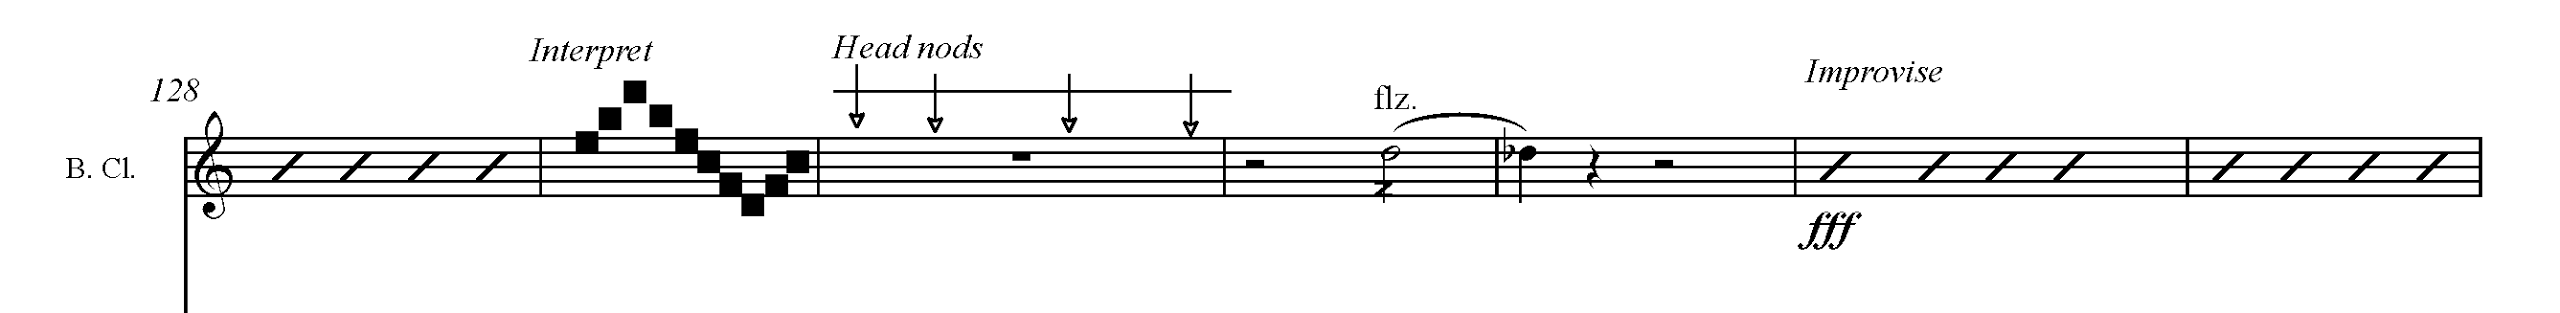 Image of a line from sheet music showing areas where the musician is free to interpret and improvise during performance of the piece